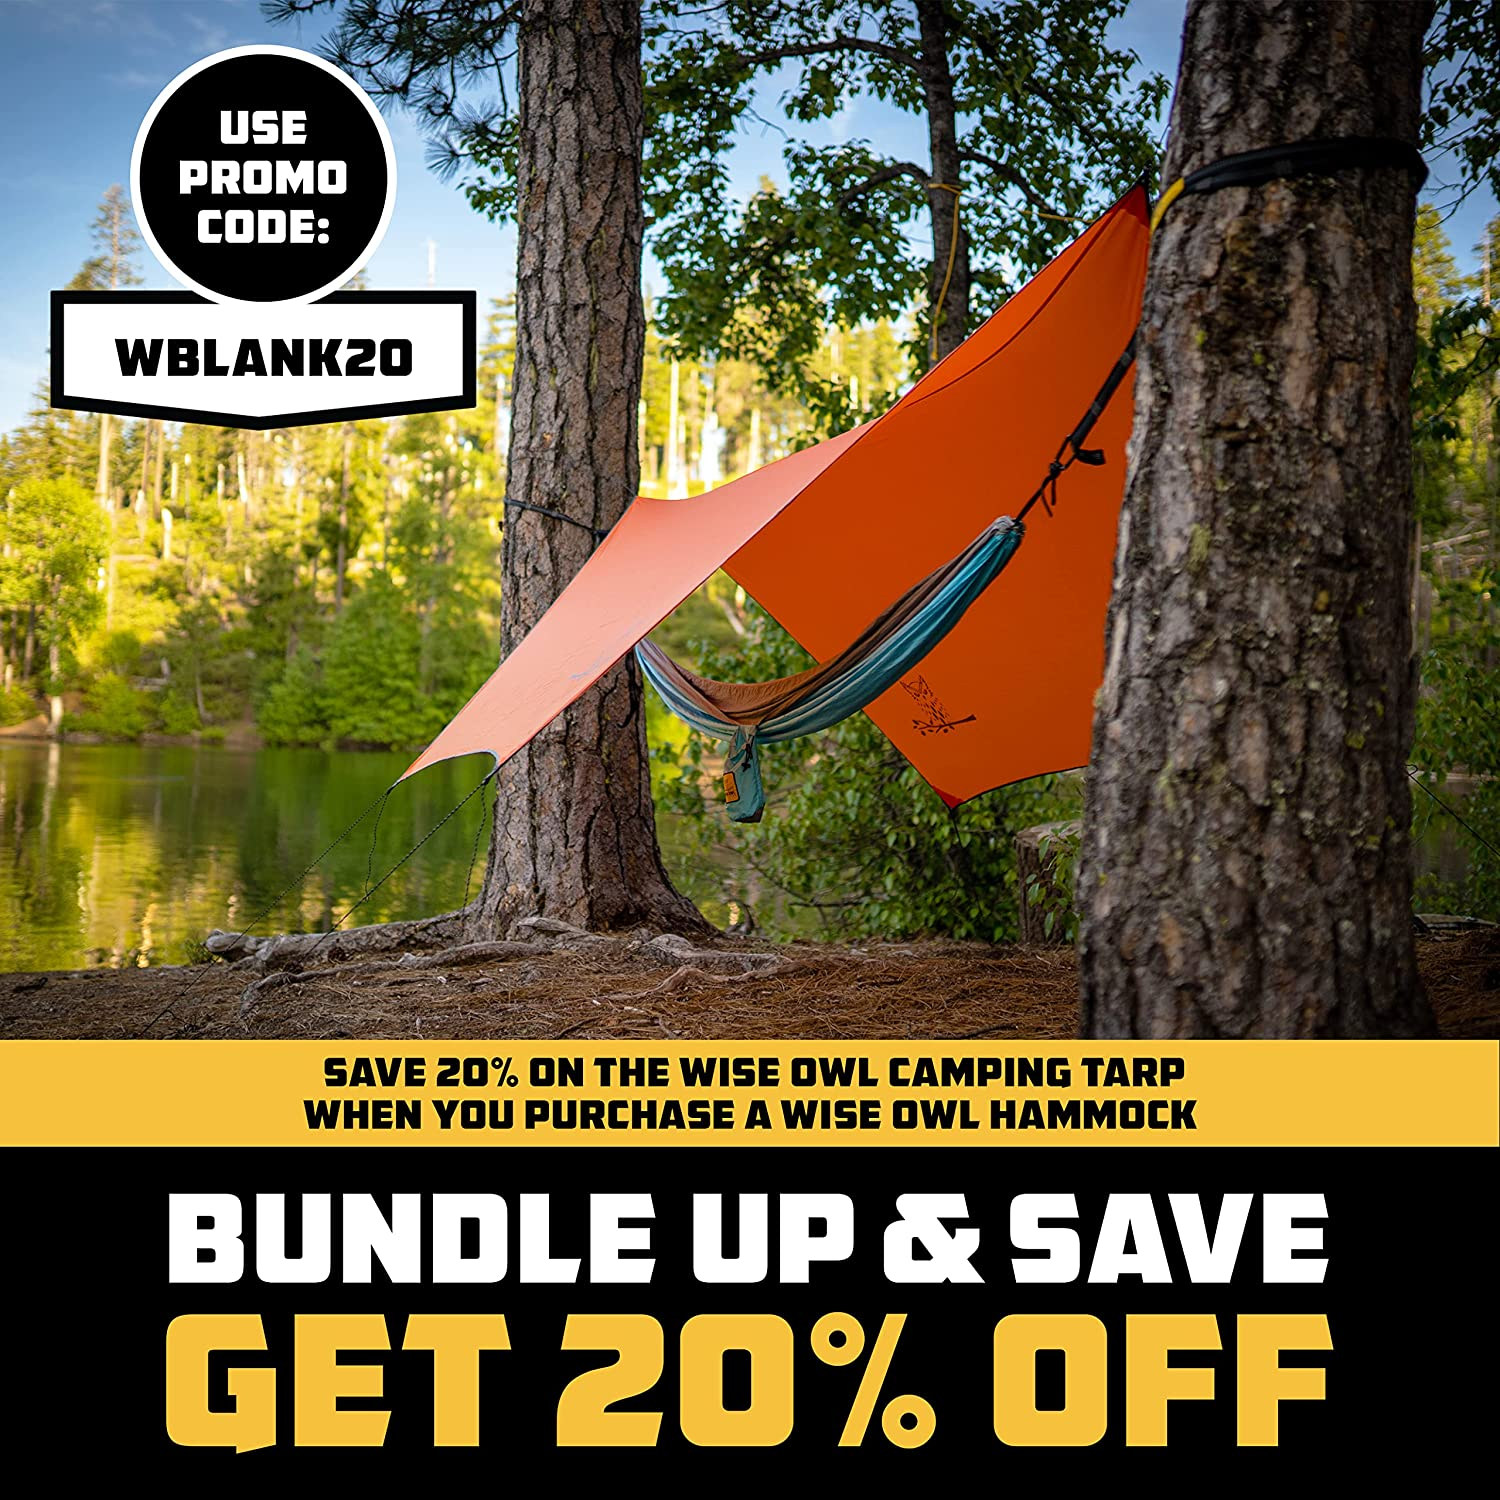 ﻿Wise Owl Outfitters Hammock for Camping Double Hammocks Gear for the Outdoors Backpacking Survival or Travel - Portable Lightweight Parachute Nylon DO